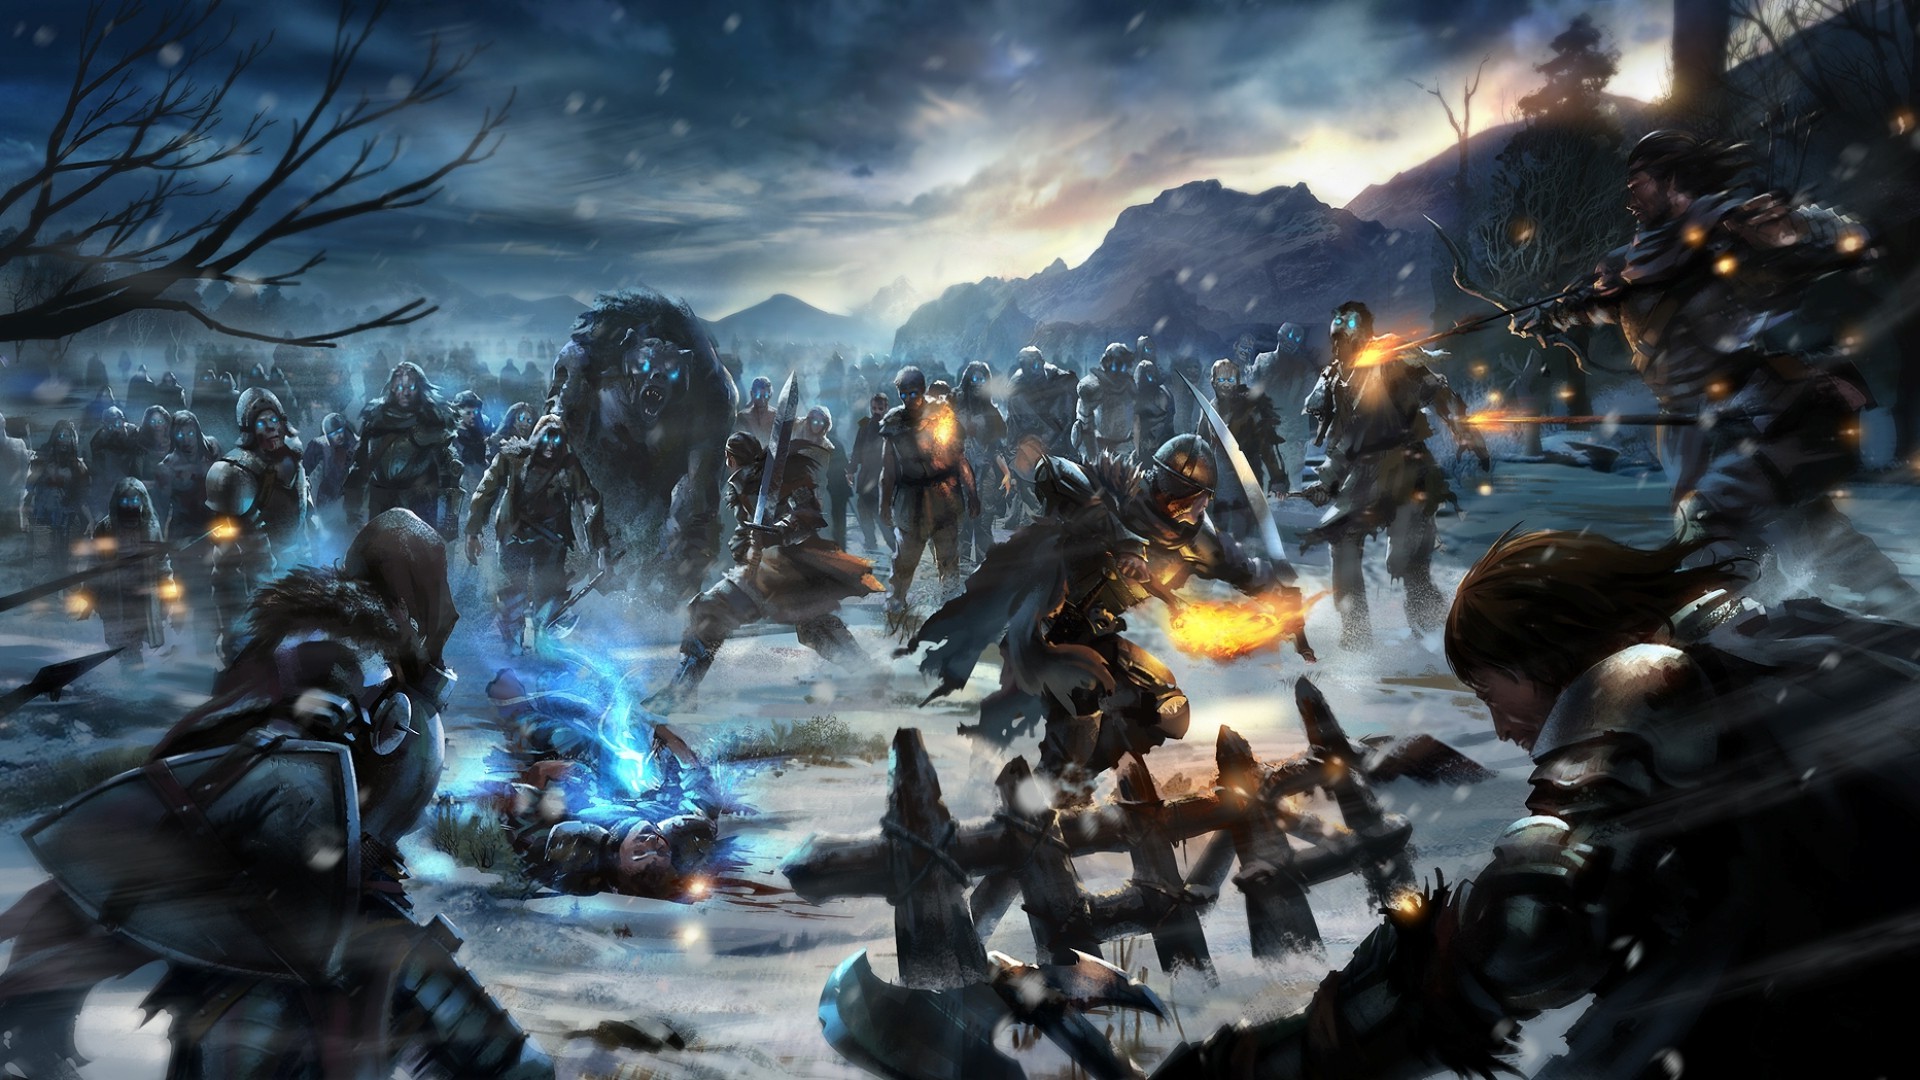 Wallpaper, 1920x1080 px, fantasy art, Game of Thrones, video games, warrior, White Walkers 1920x1080